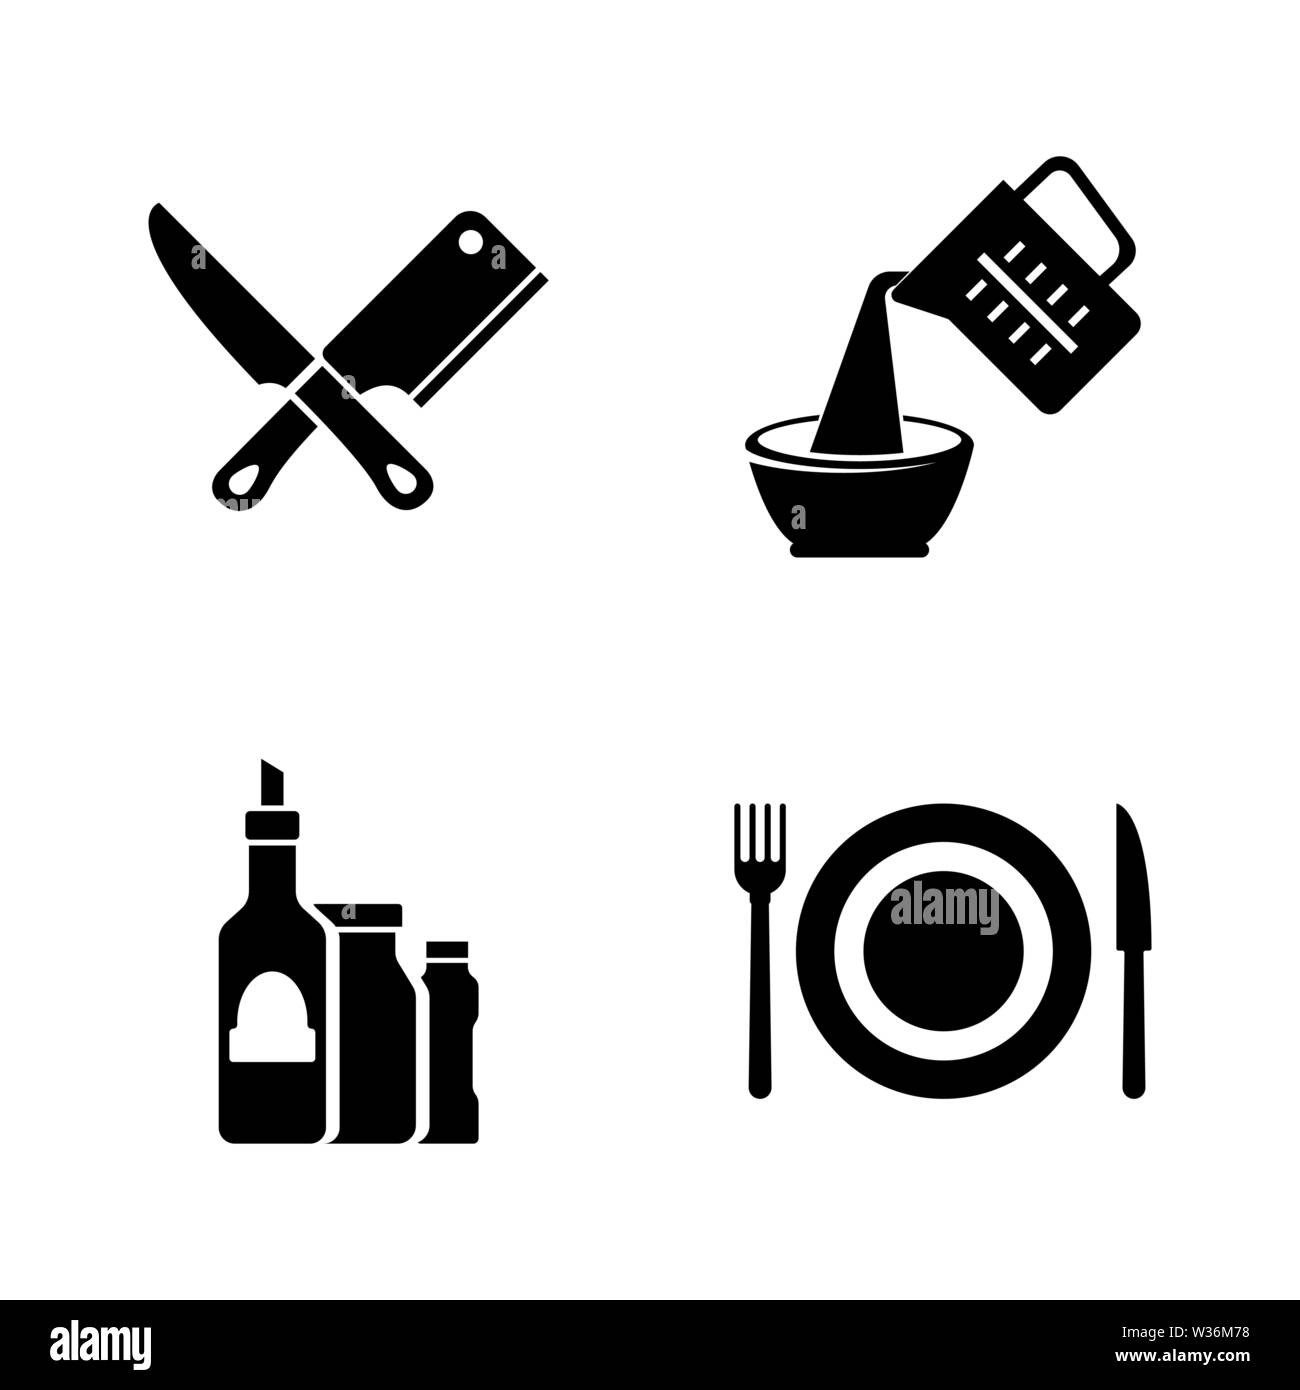 https://c8.alamy.com/comp/W36M78/cooking-kitchen-tools-simple-related-vector-icons-set-for-video-mobile-apps-web-sites-print-projects-and-your-design-cooking-kitchen-tools-icon-W36M78.jpg